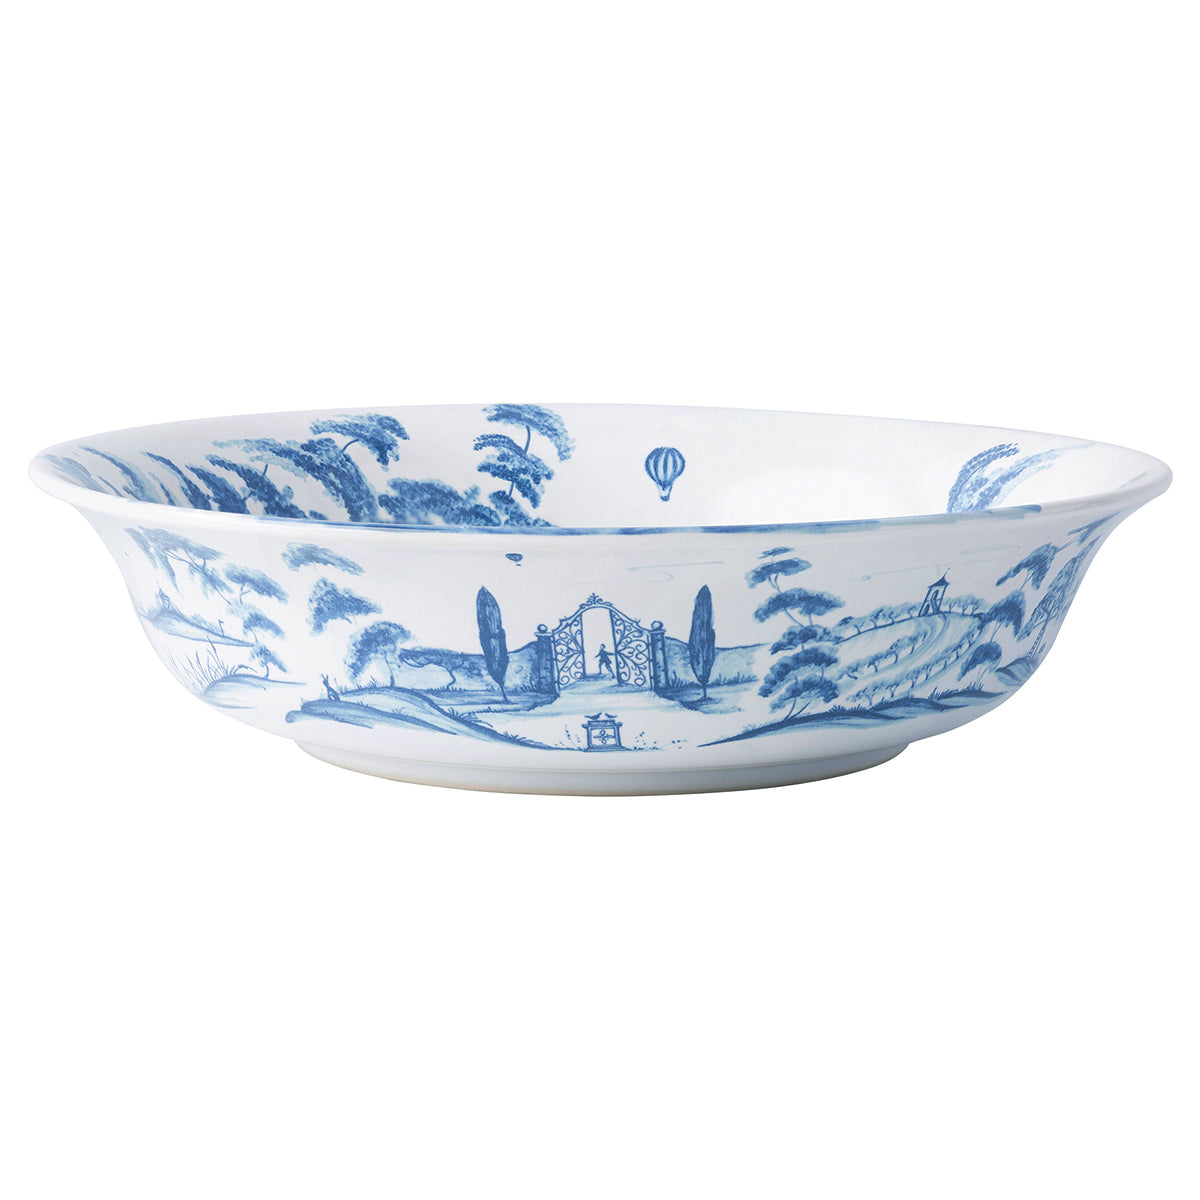 Country Estate 13" Serving Bowl - Delft Blue | 2nd